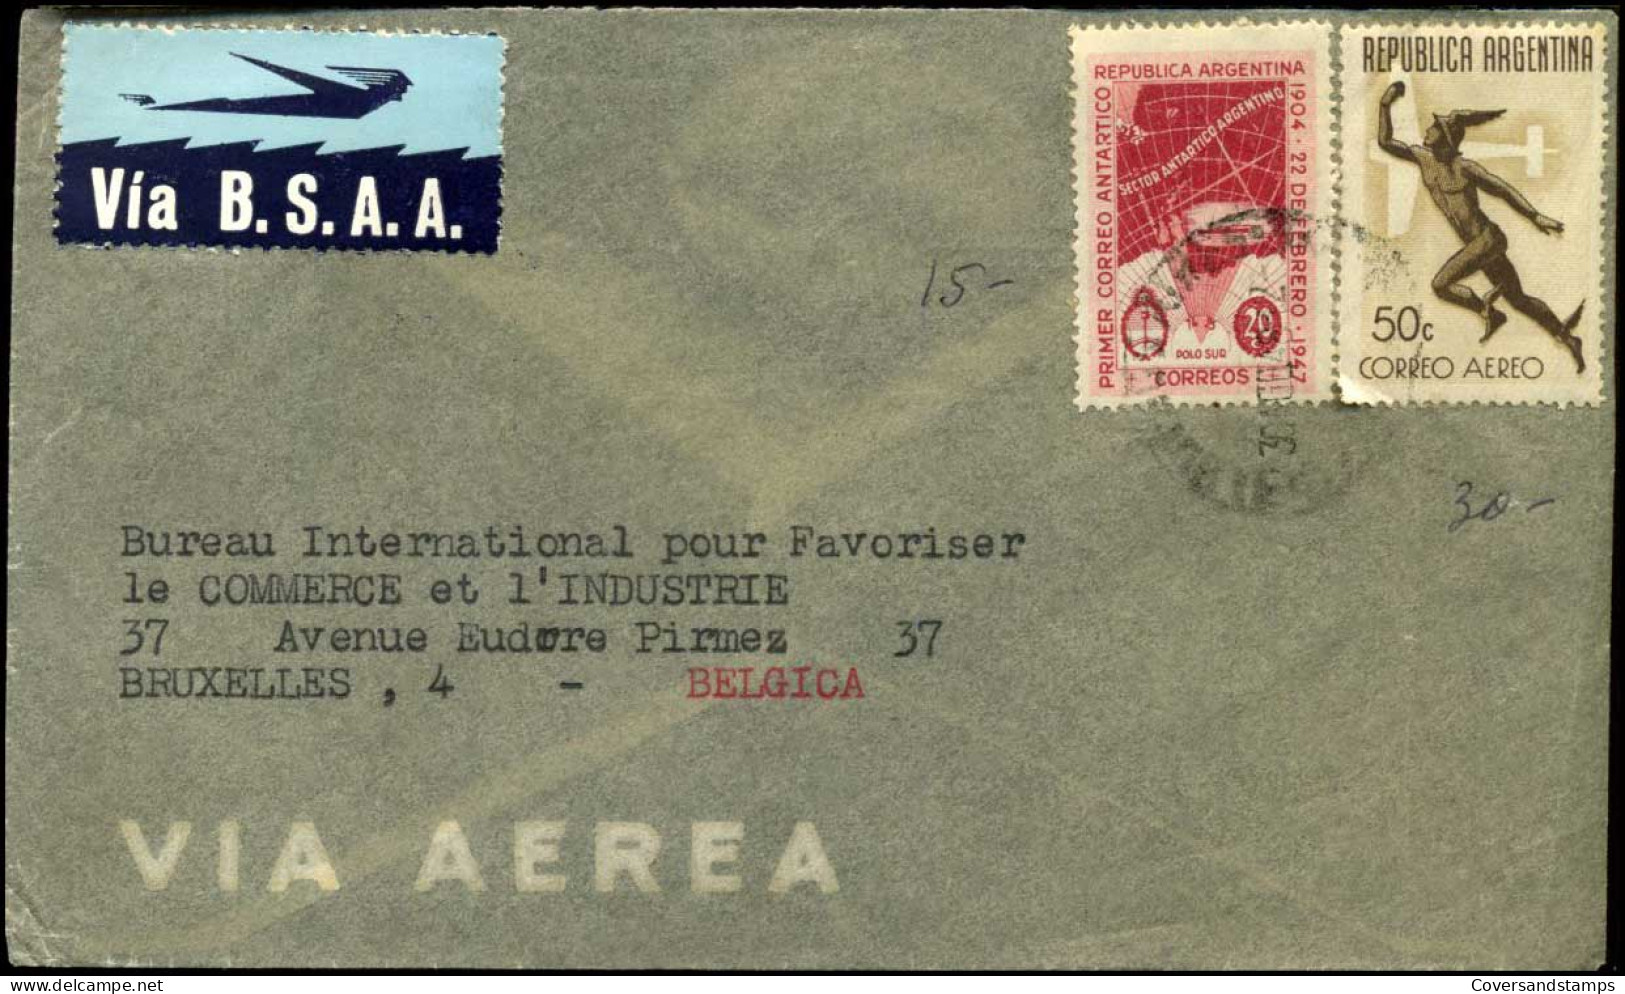 Cover To Brussels, Belgium - Via B.S.A.A. -- "Primer Correo Antartico" - Luftpost